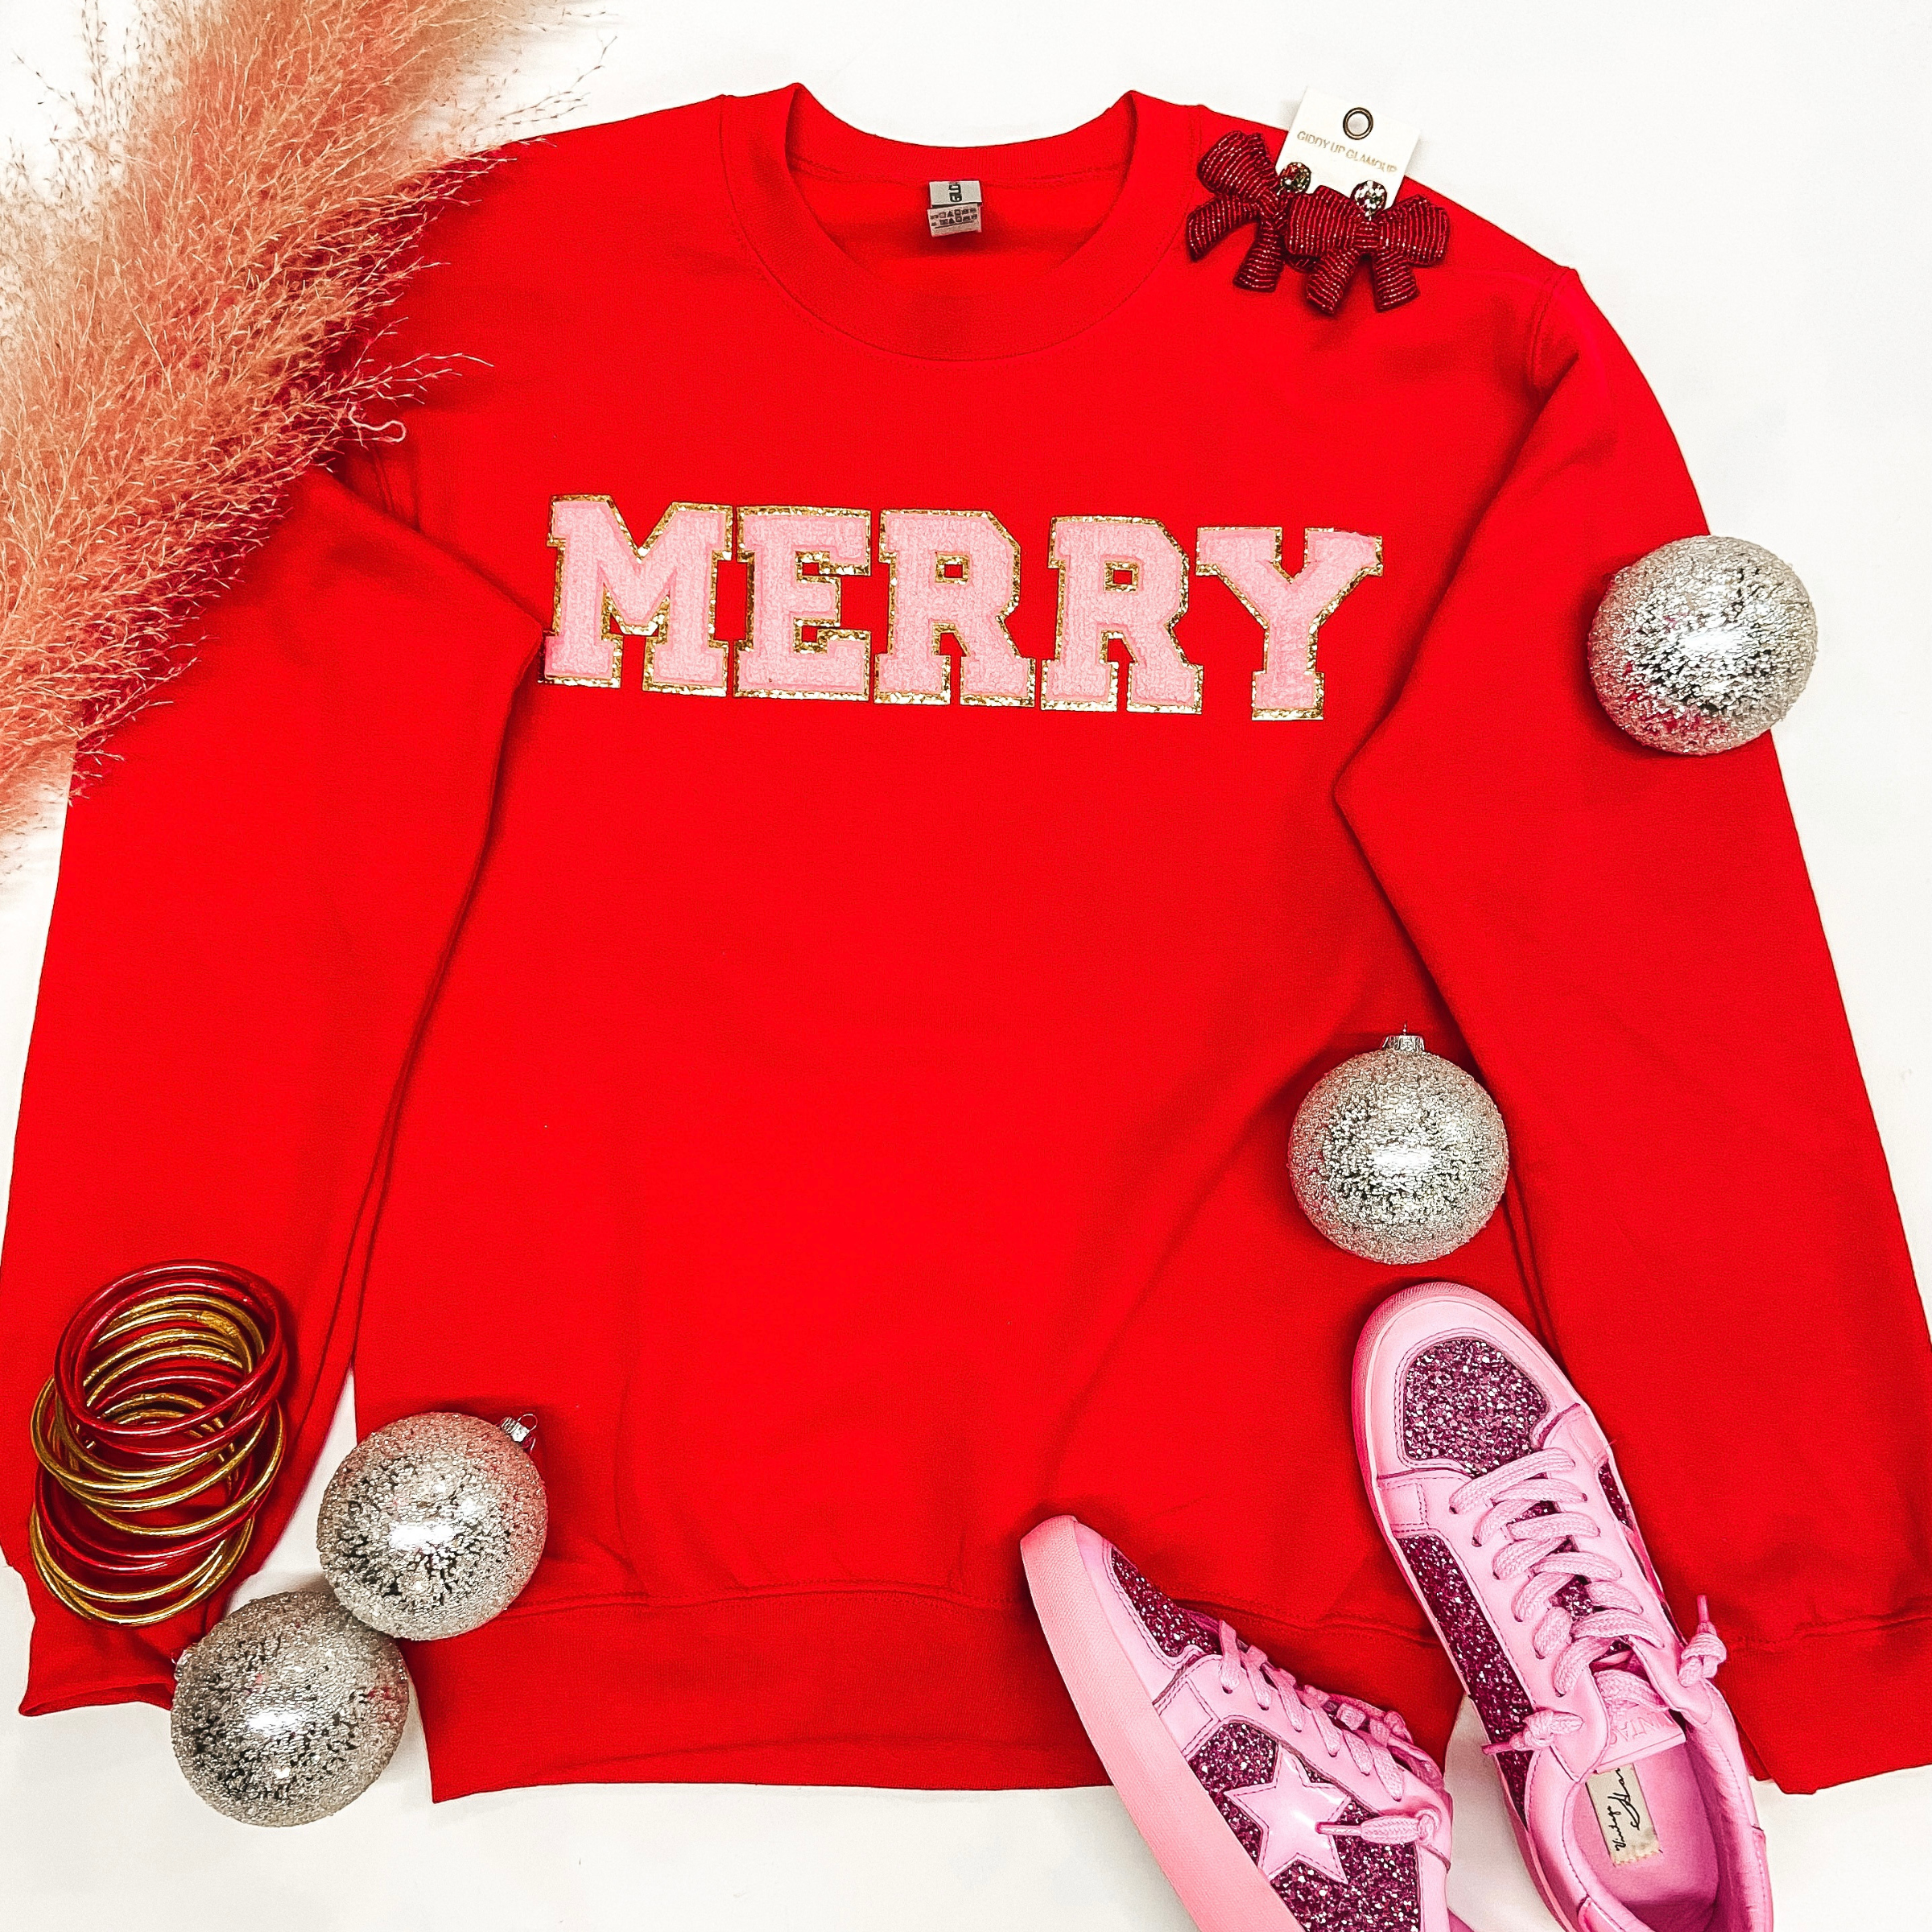 A long sleeve crew neck sweatshirt that is bright green with "Merry" across the chest in pink chenille letters with gold trim. Pictured on a white background with sneakers, gold and pink jewelry, and Christmas ornaments.